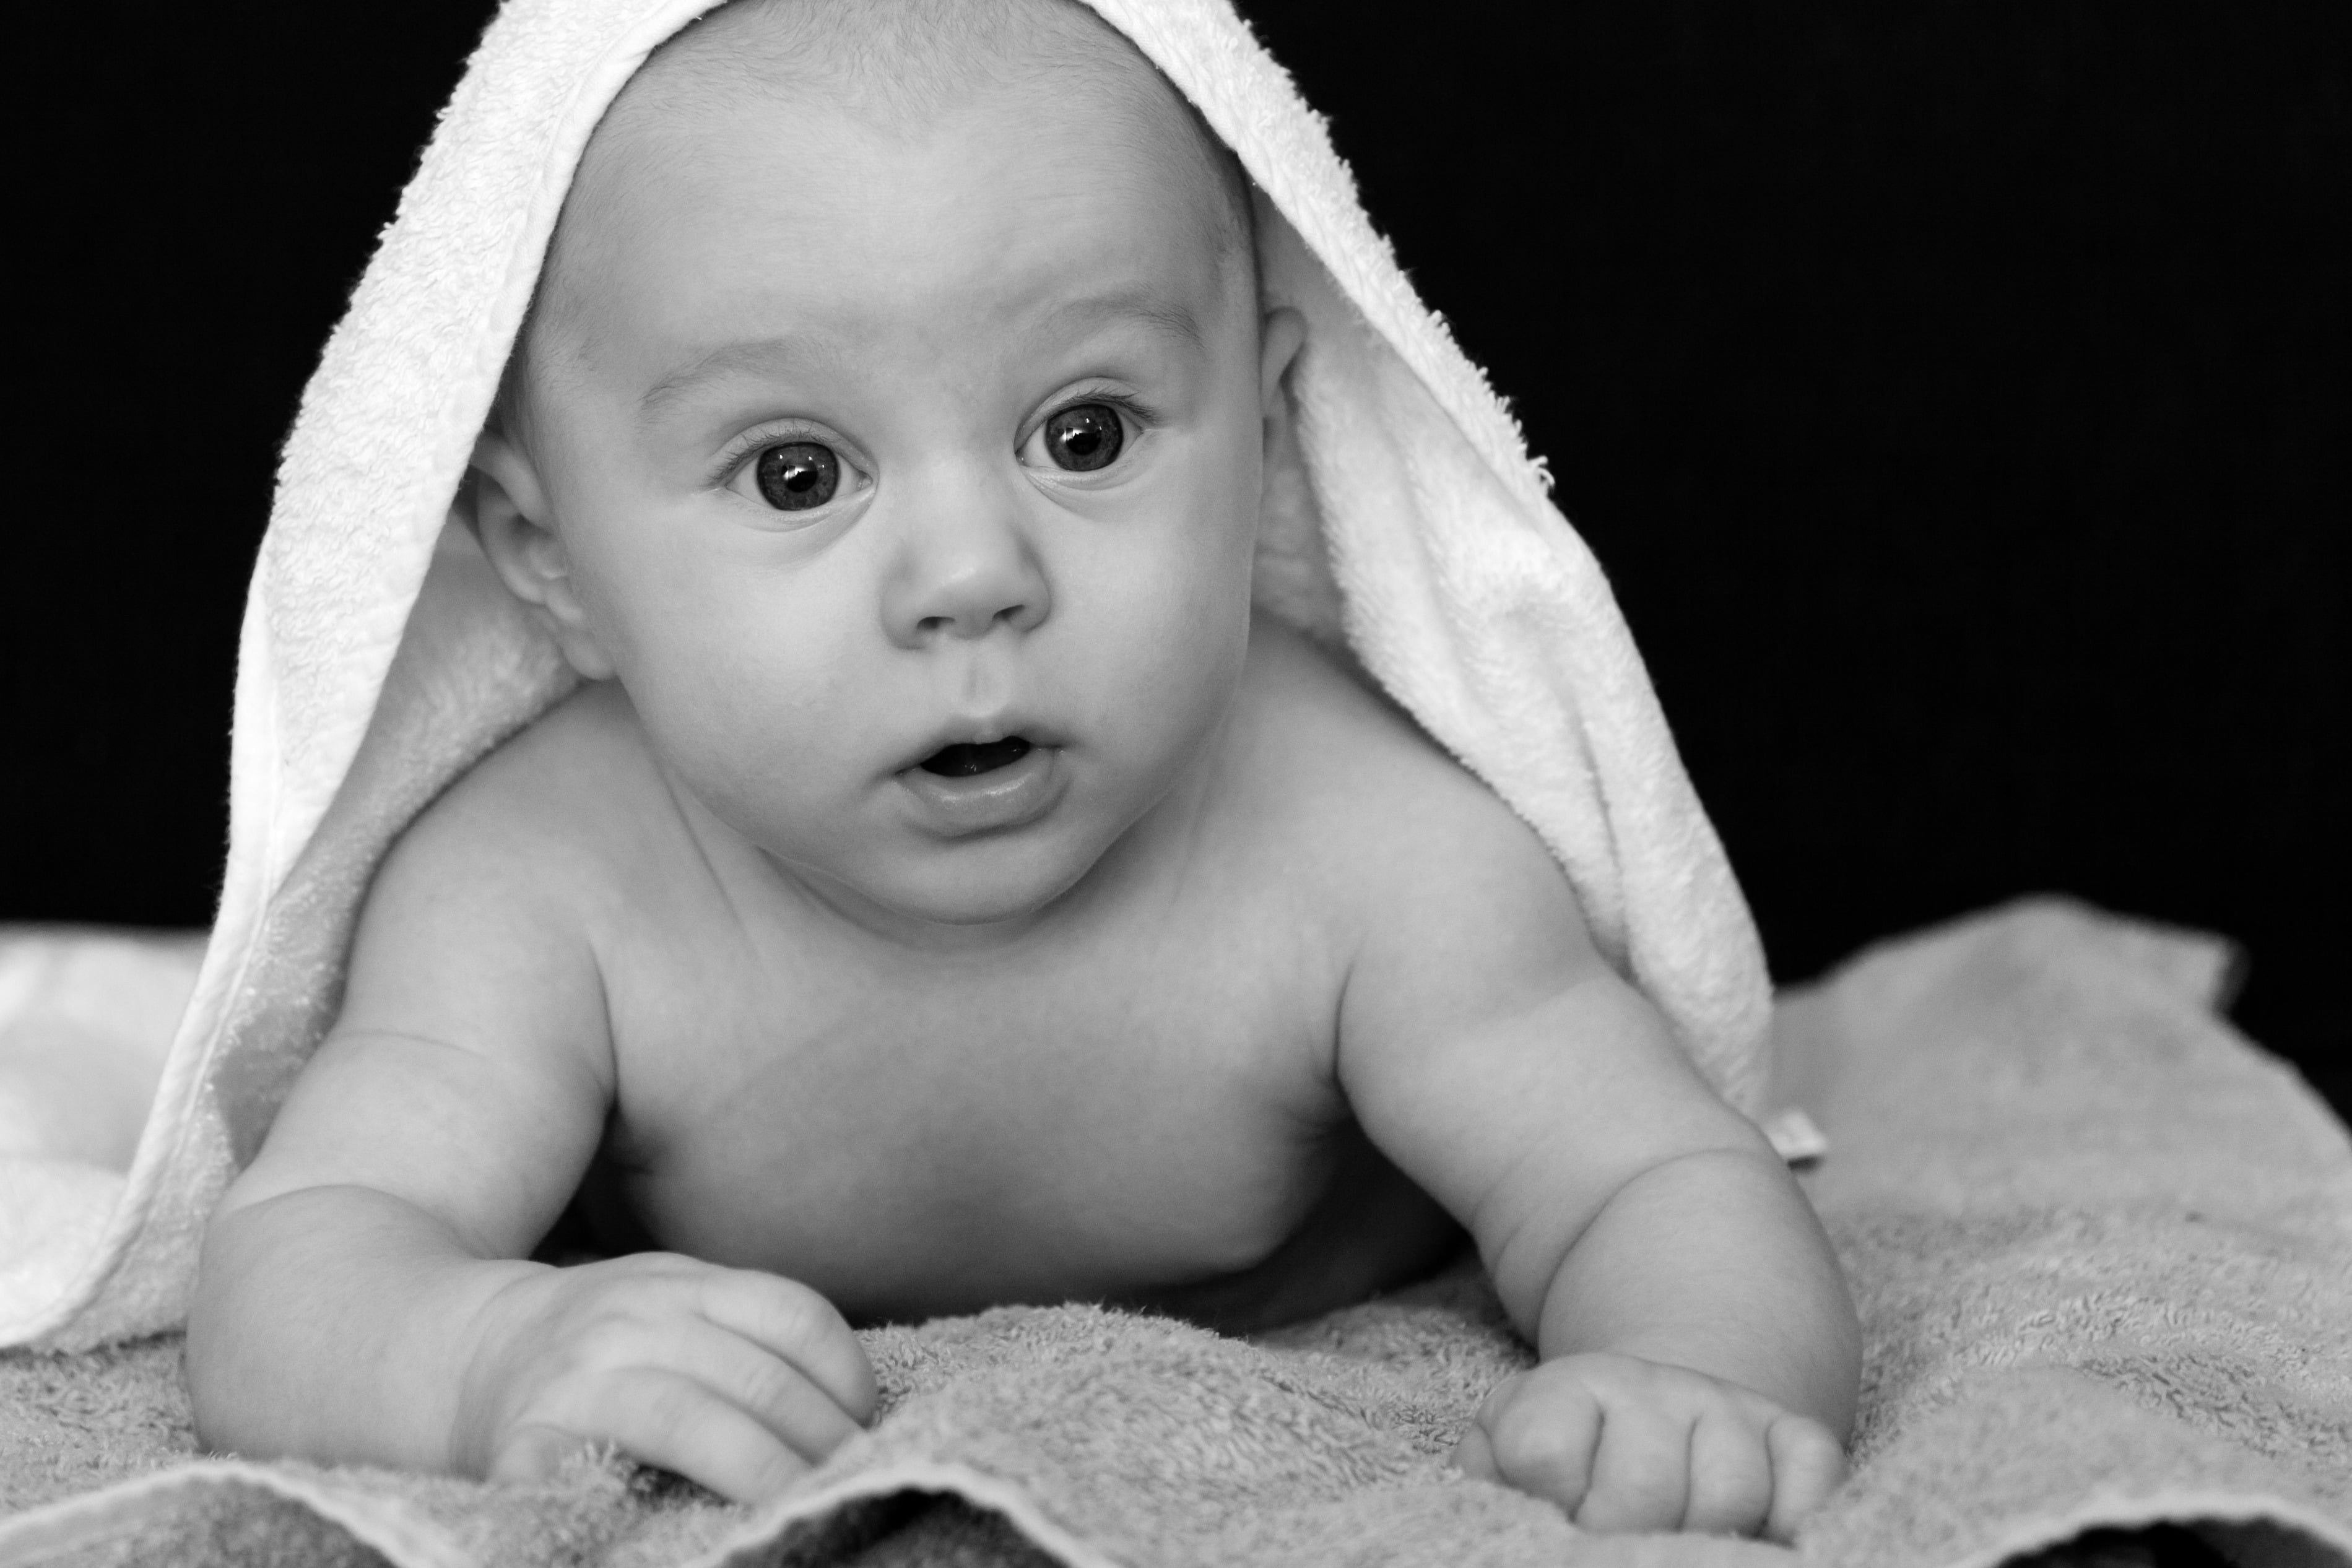 baby covered by towel grayscale photo